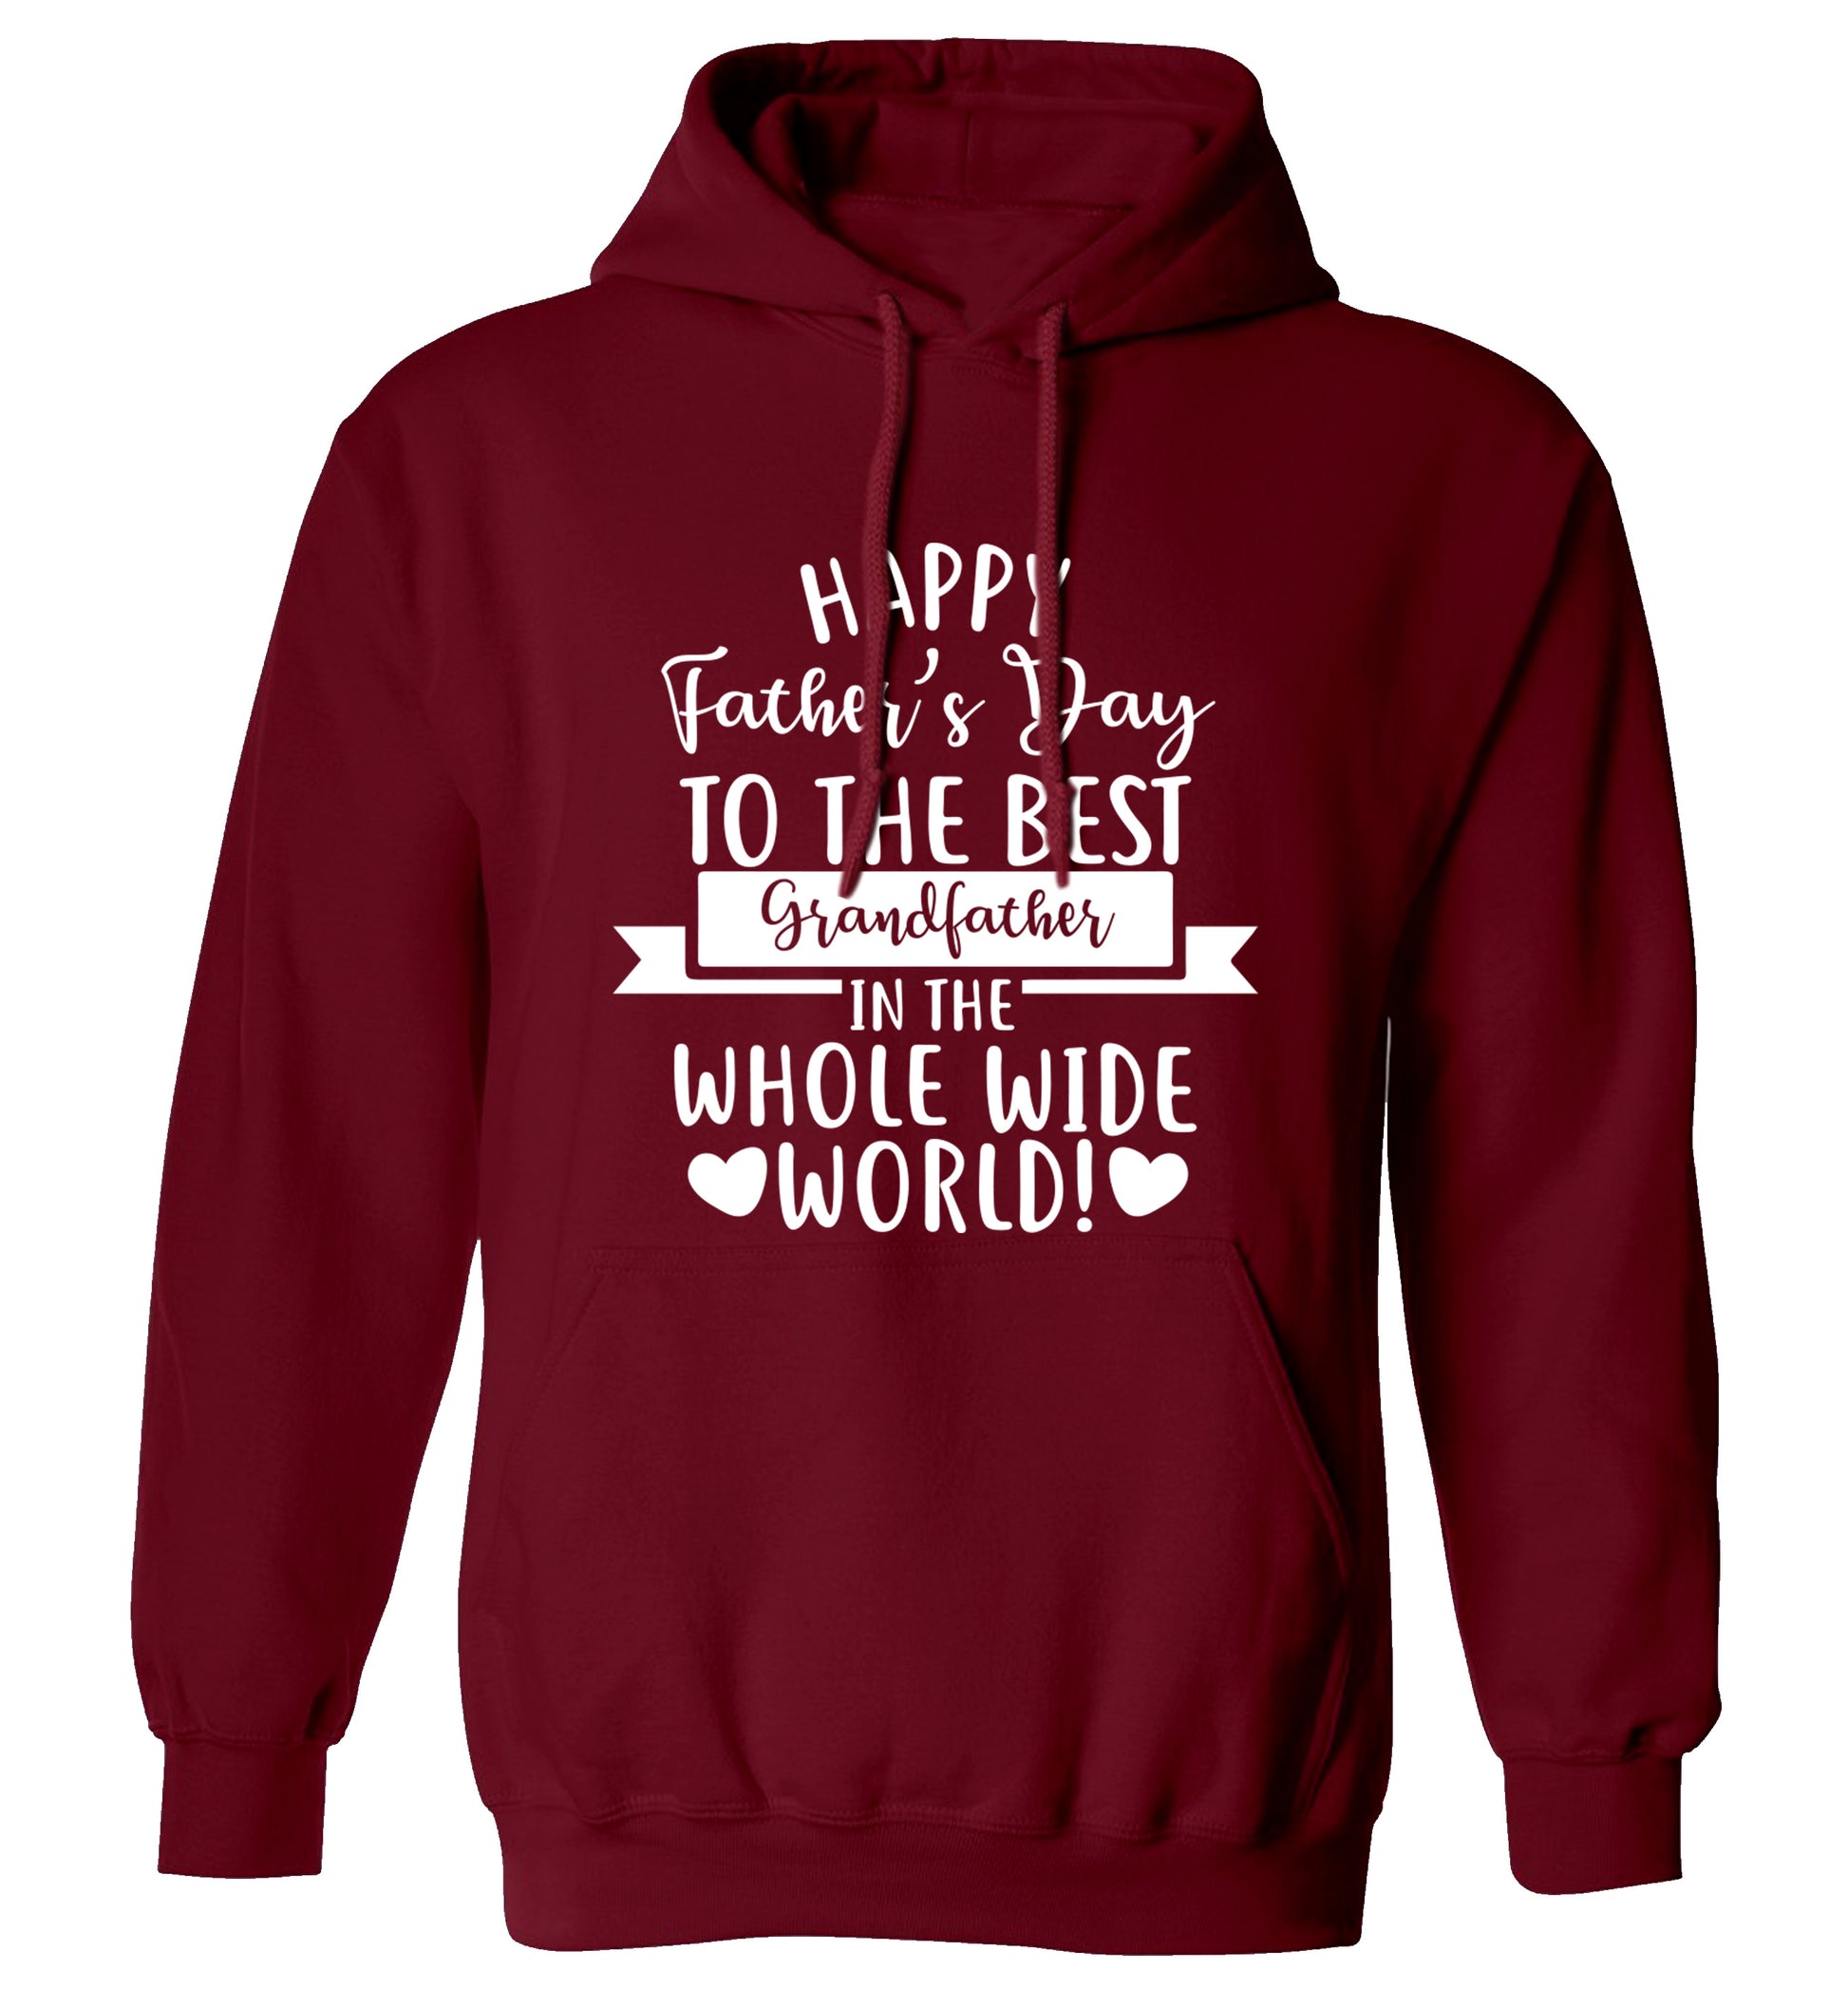 Happy Father's Day to the best grandfather in the world adults unisex maroon hoodie 2XL